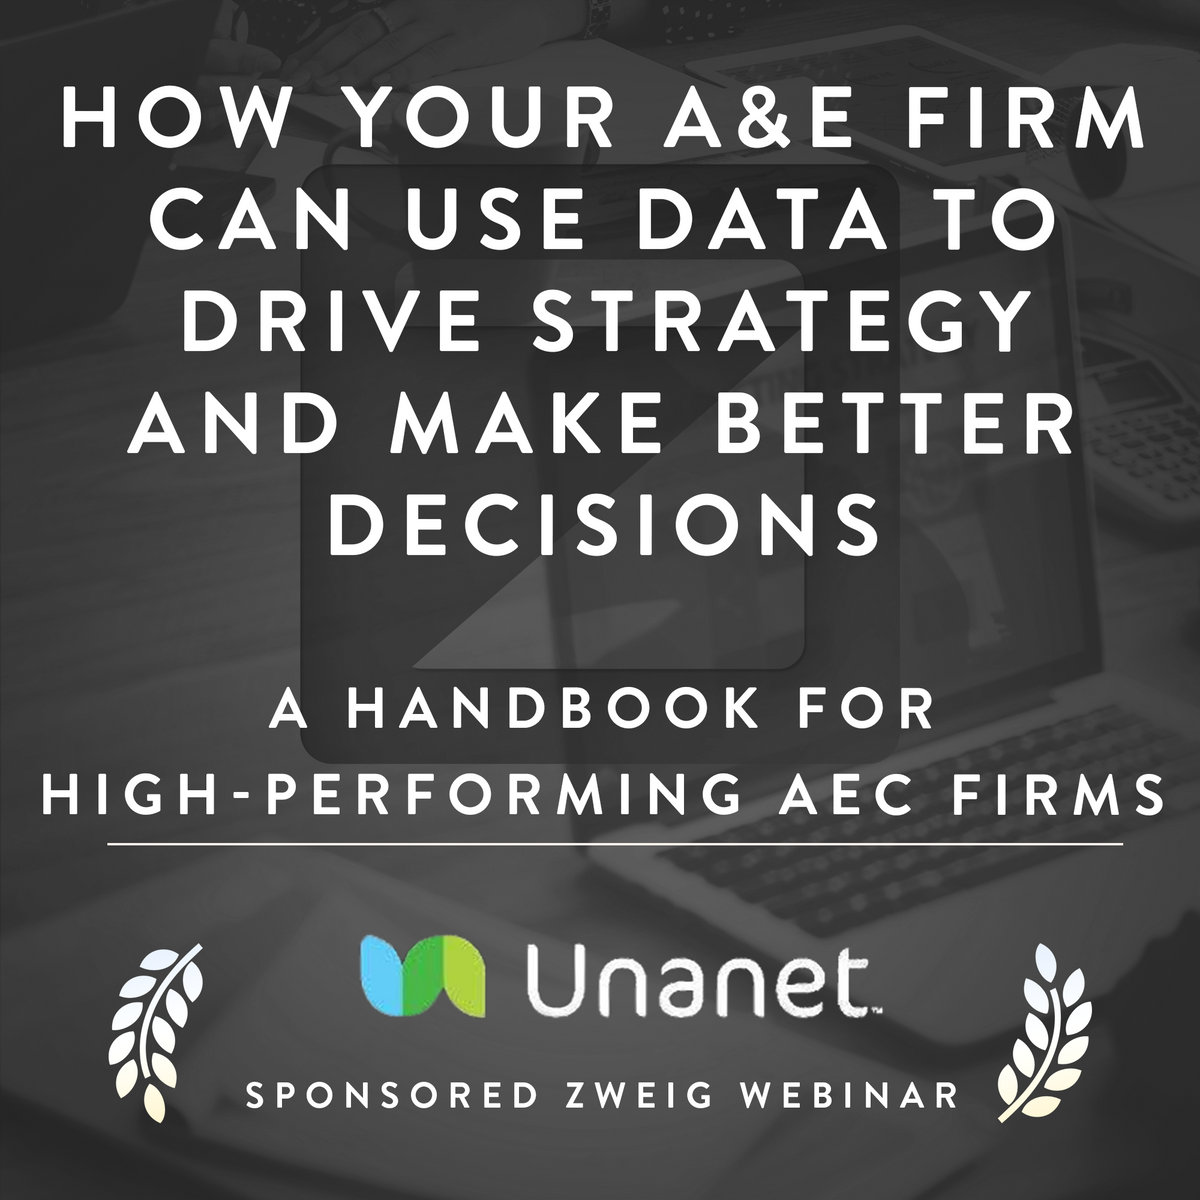 How Your A&E Firm Can Use Data to Drive Strategy and Make Better Decisions - A Unanet Sponsored Webinar Cover